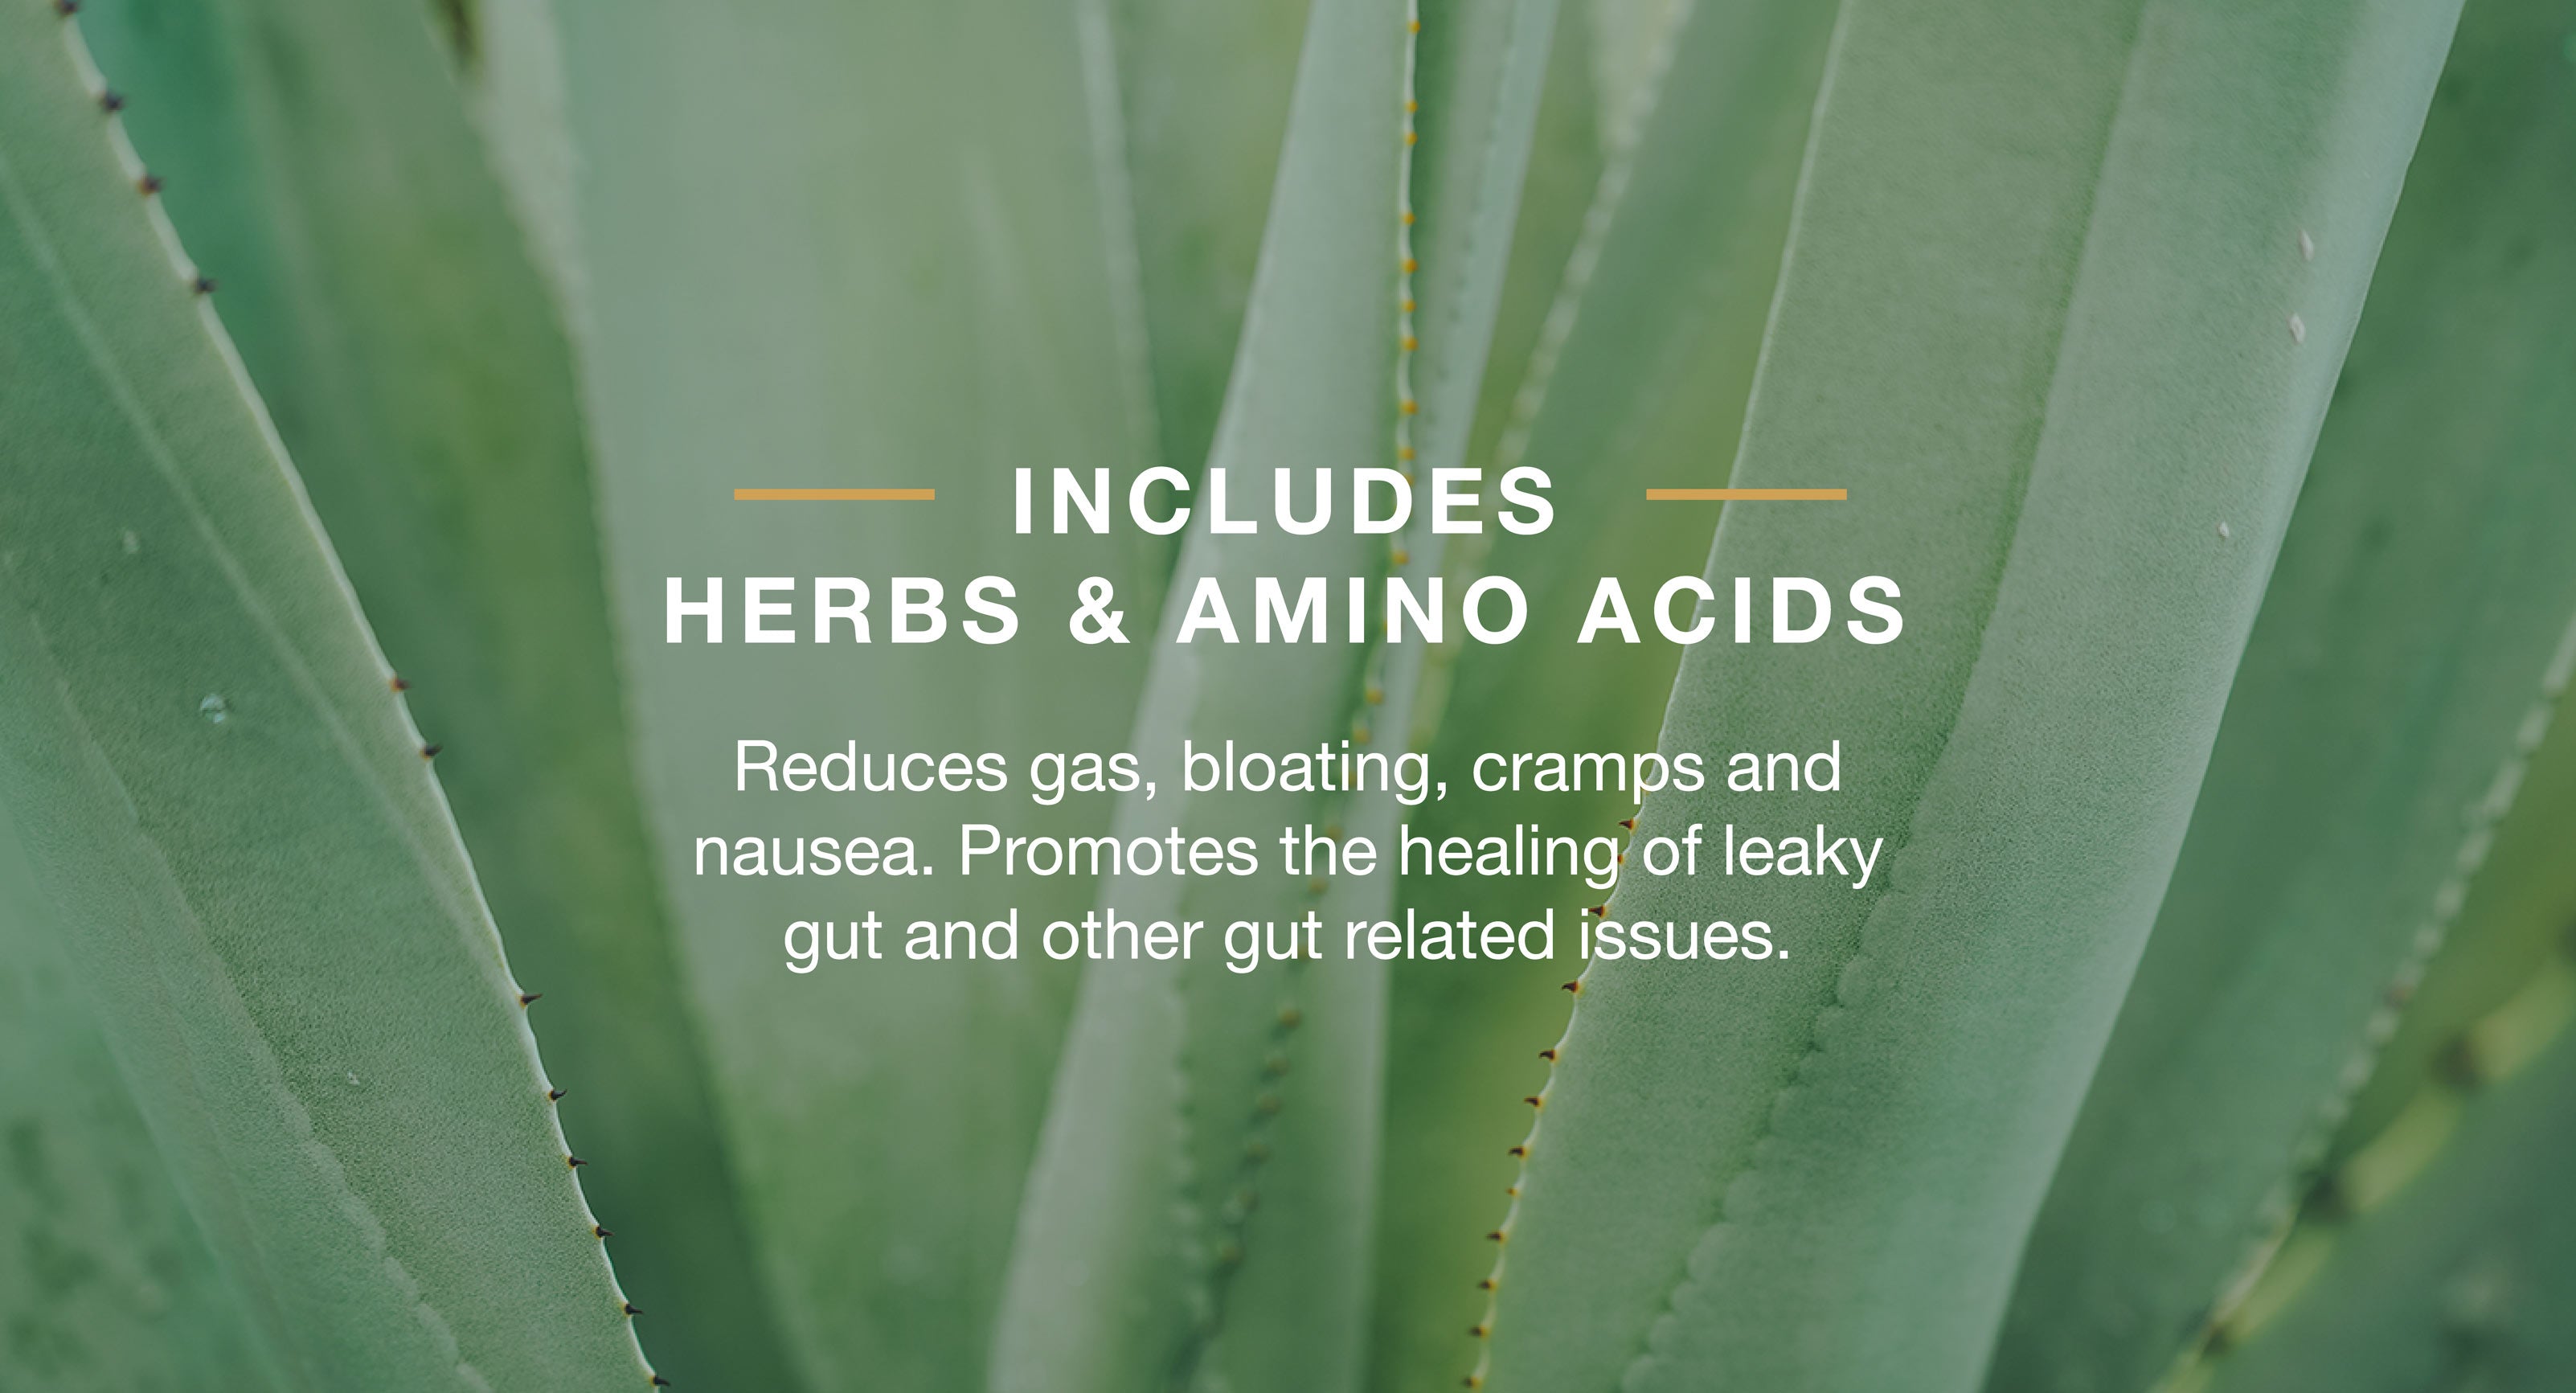 Reduces gas and nausea while promiting the healing of leaky gut with the inclusion of herbs and amino acids